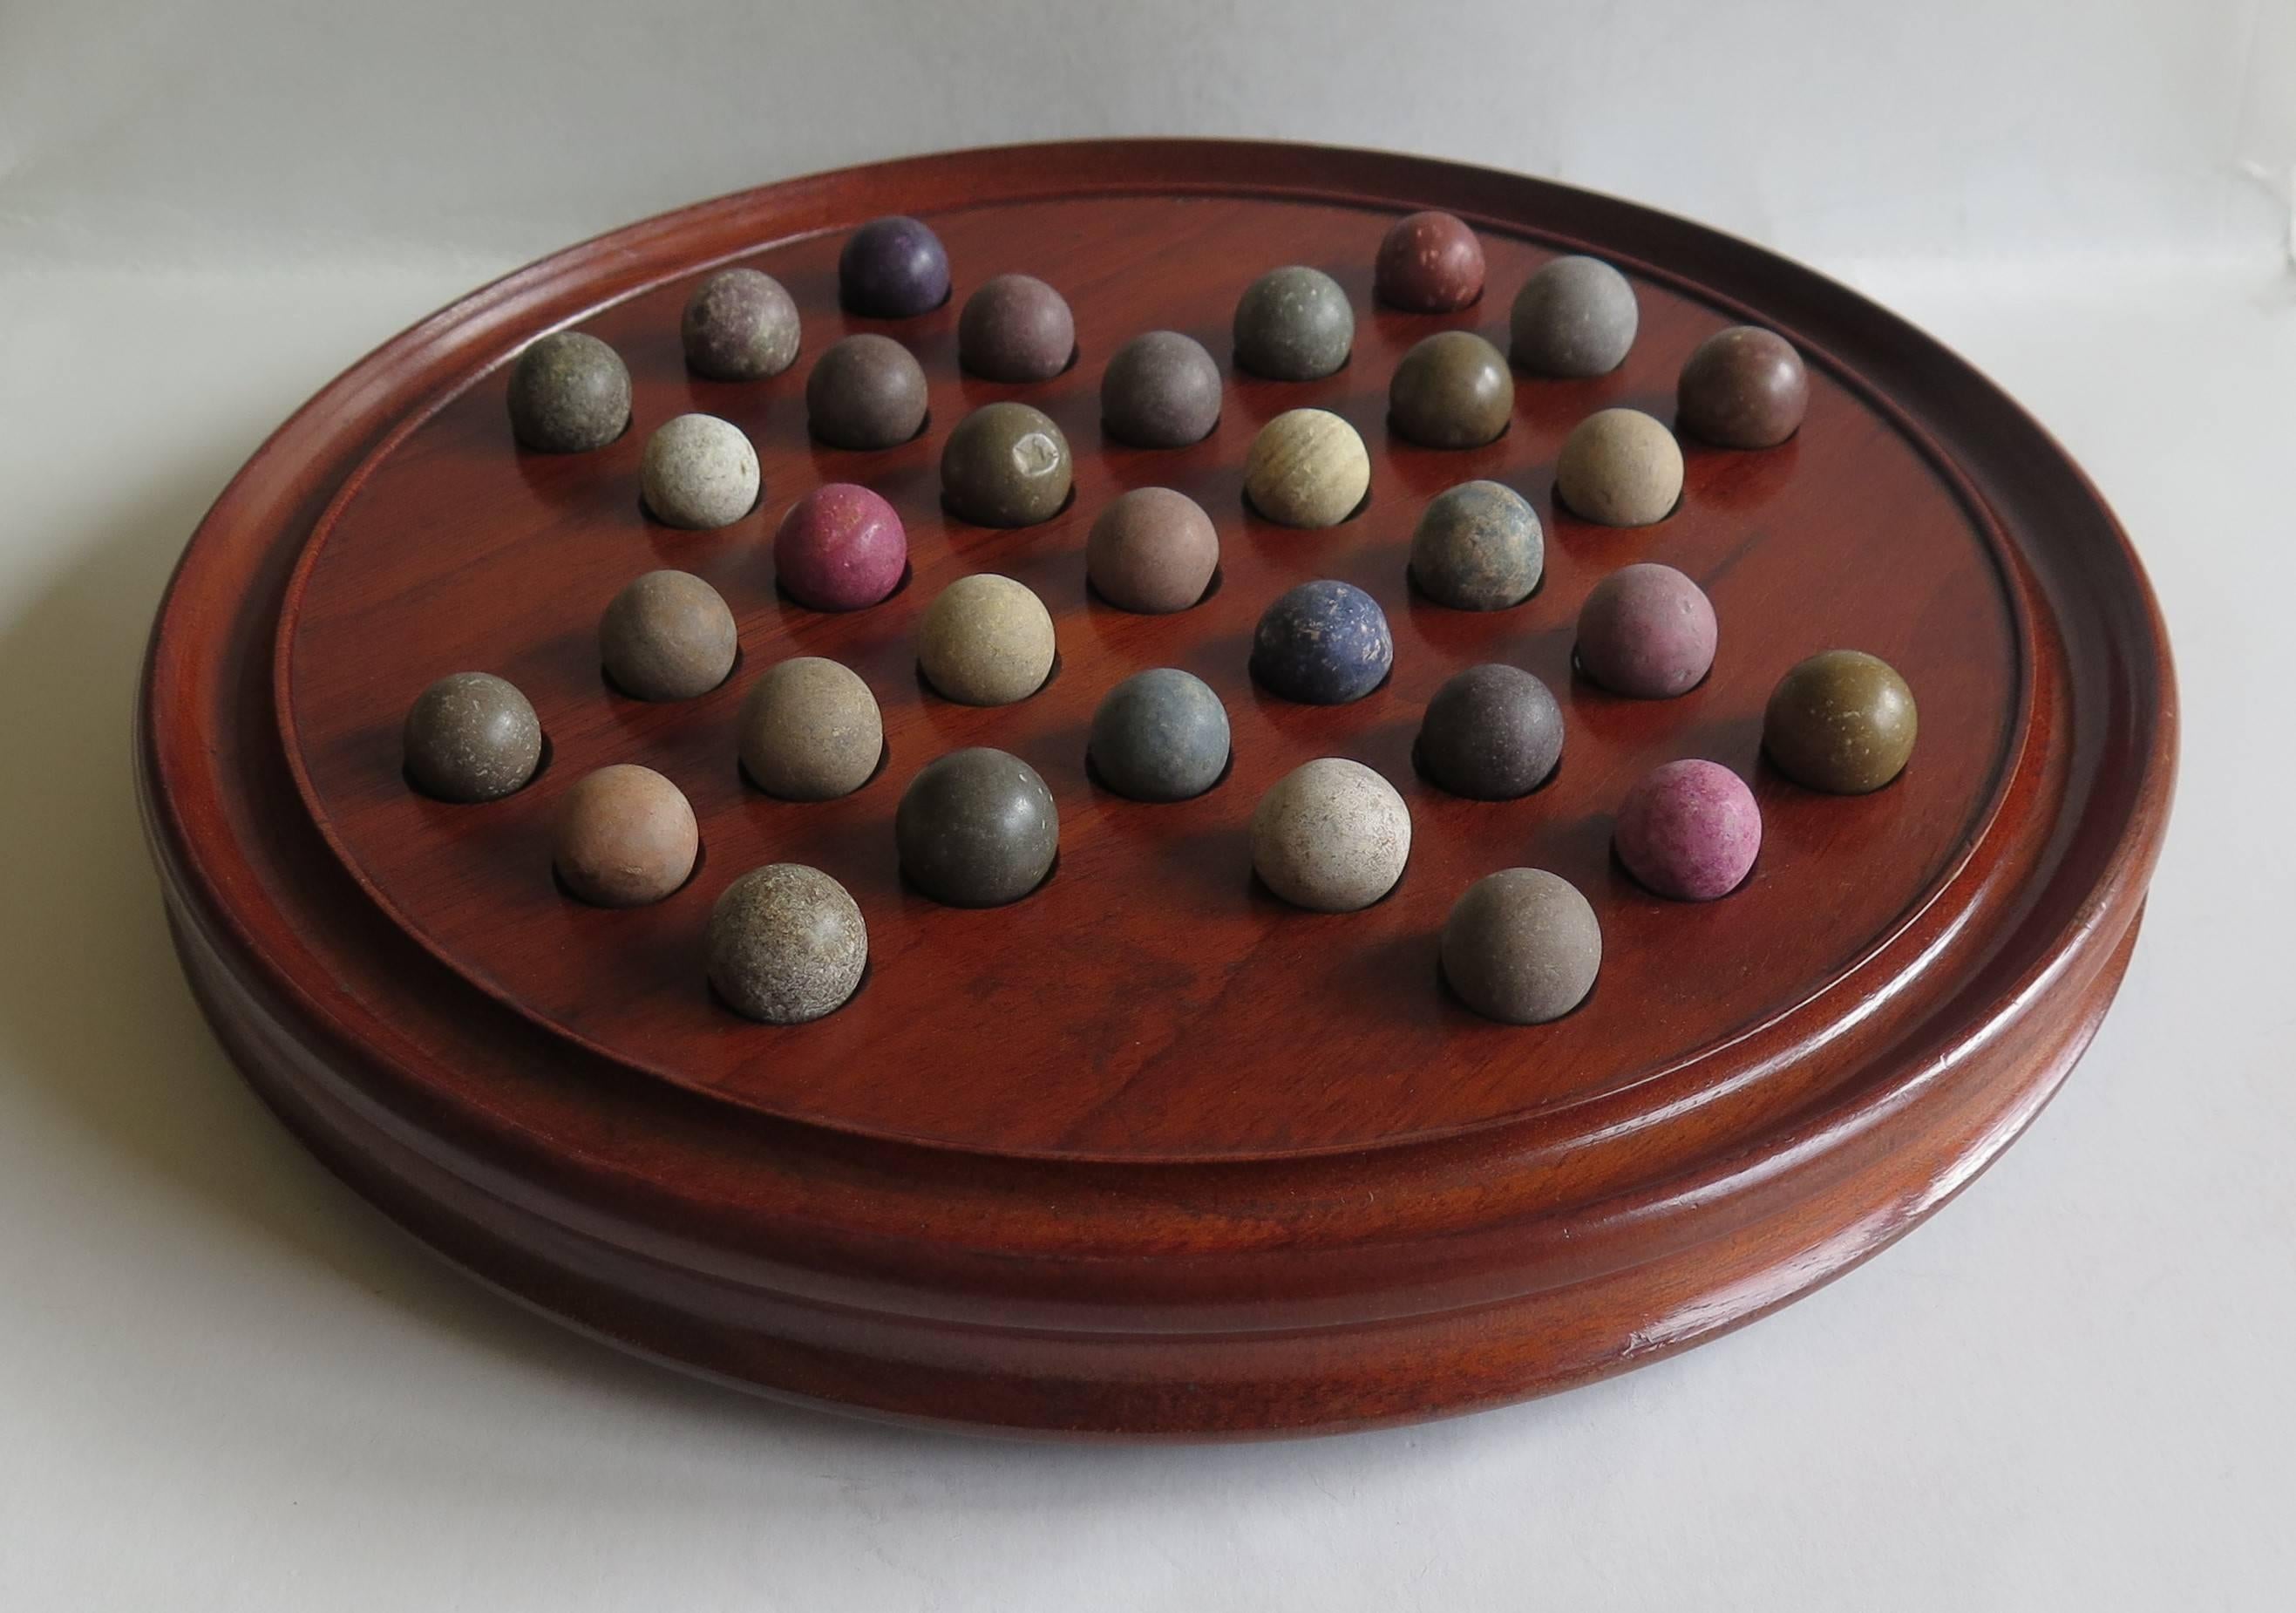 Victorian 19th Century, Table Solitaire Marble Board Game, with 33 Handmade Early Marbles